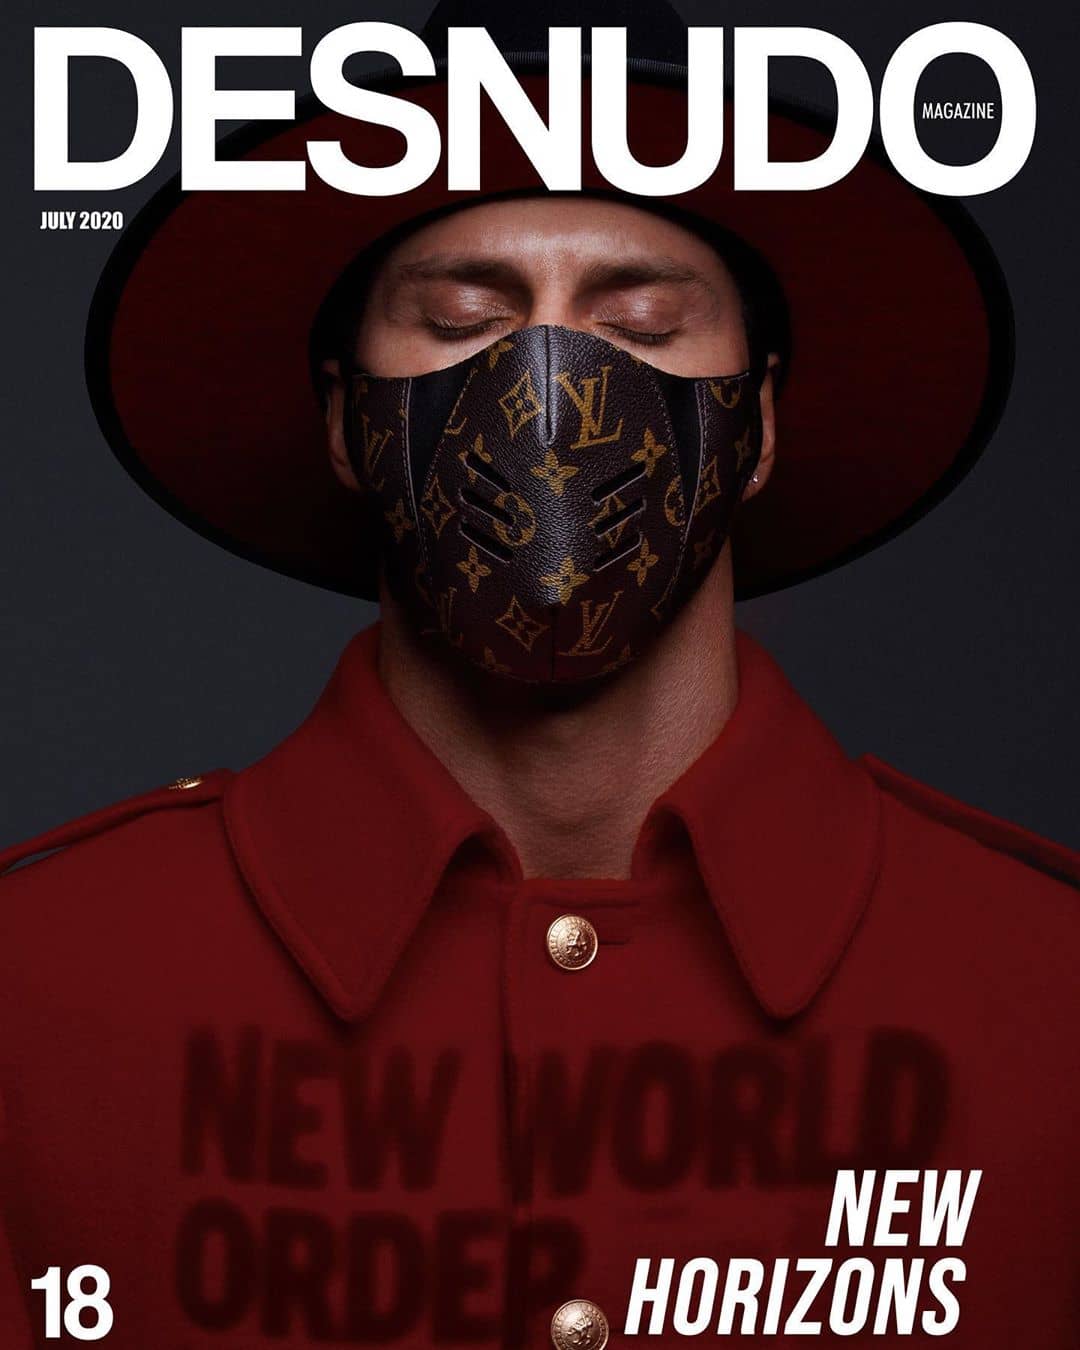 Kenny Braasch as the cover model of issue 18 of Desnudo Magazine wearing a Louis Vuitton mask, red jacket, and red-brimmed hat.